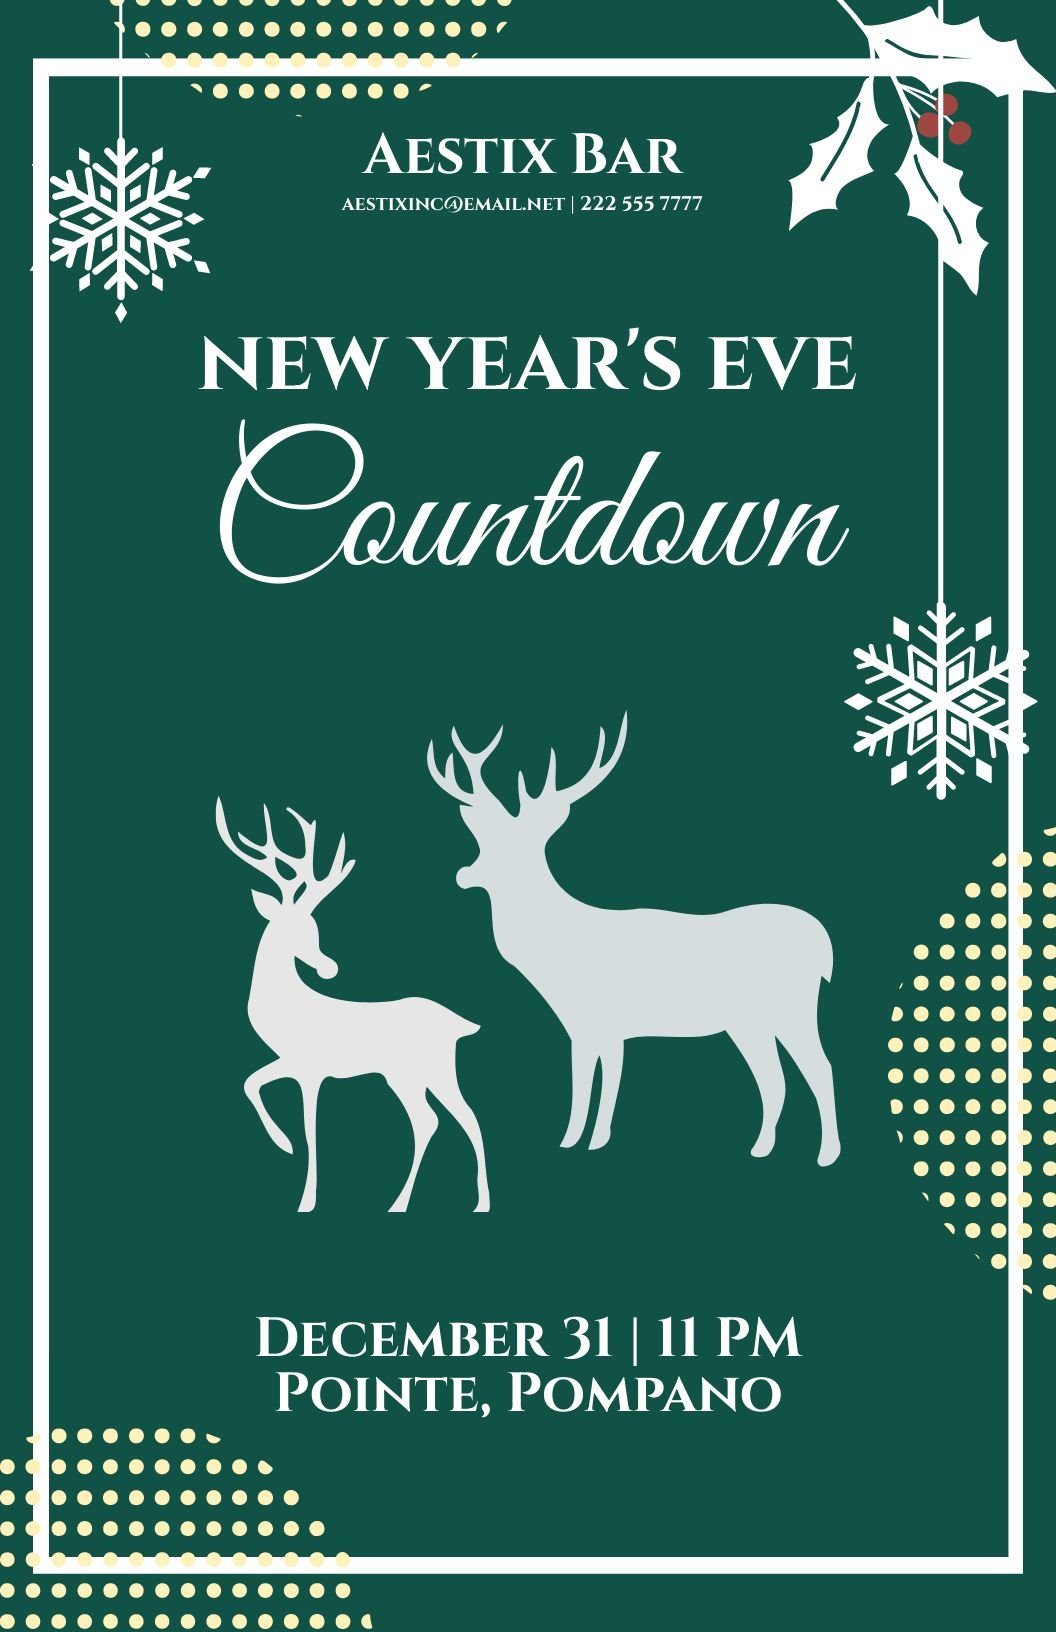 New Year's Eve Event Poster